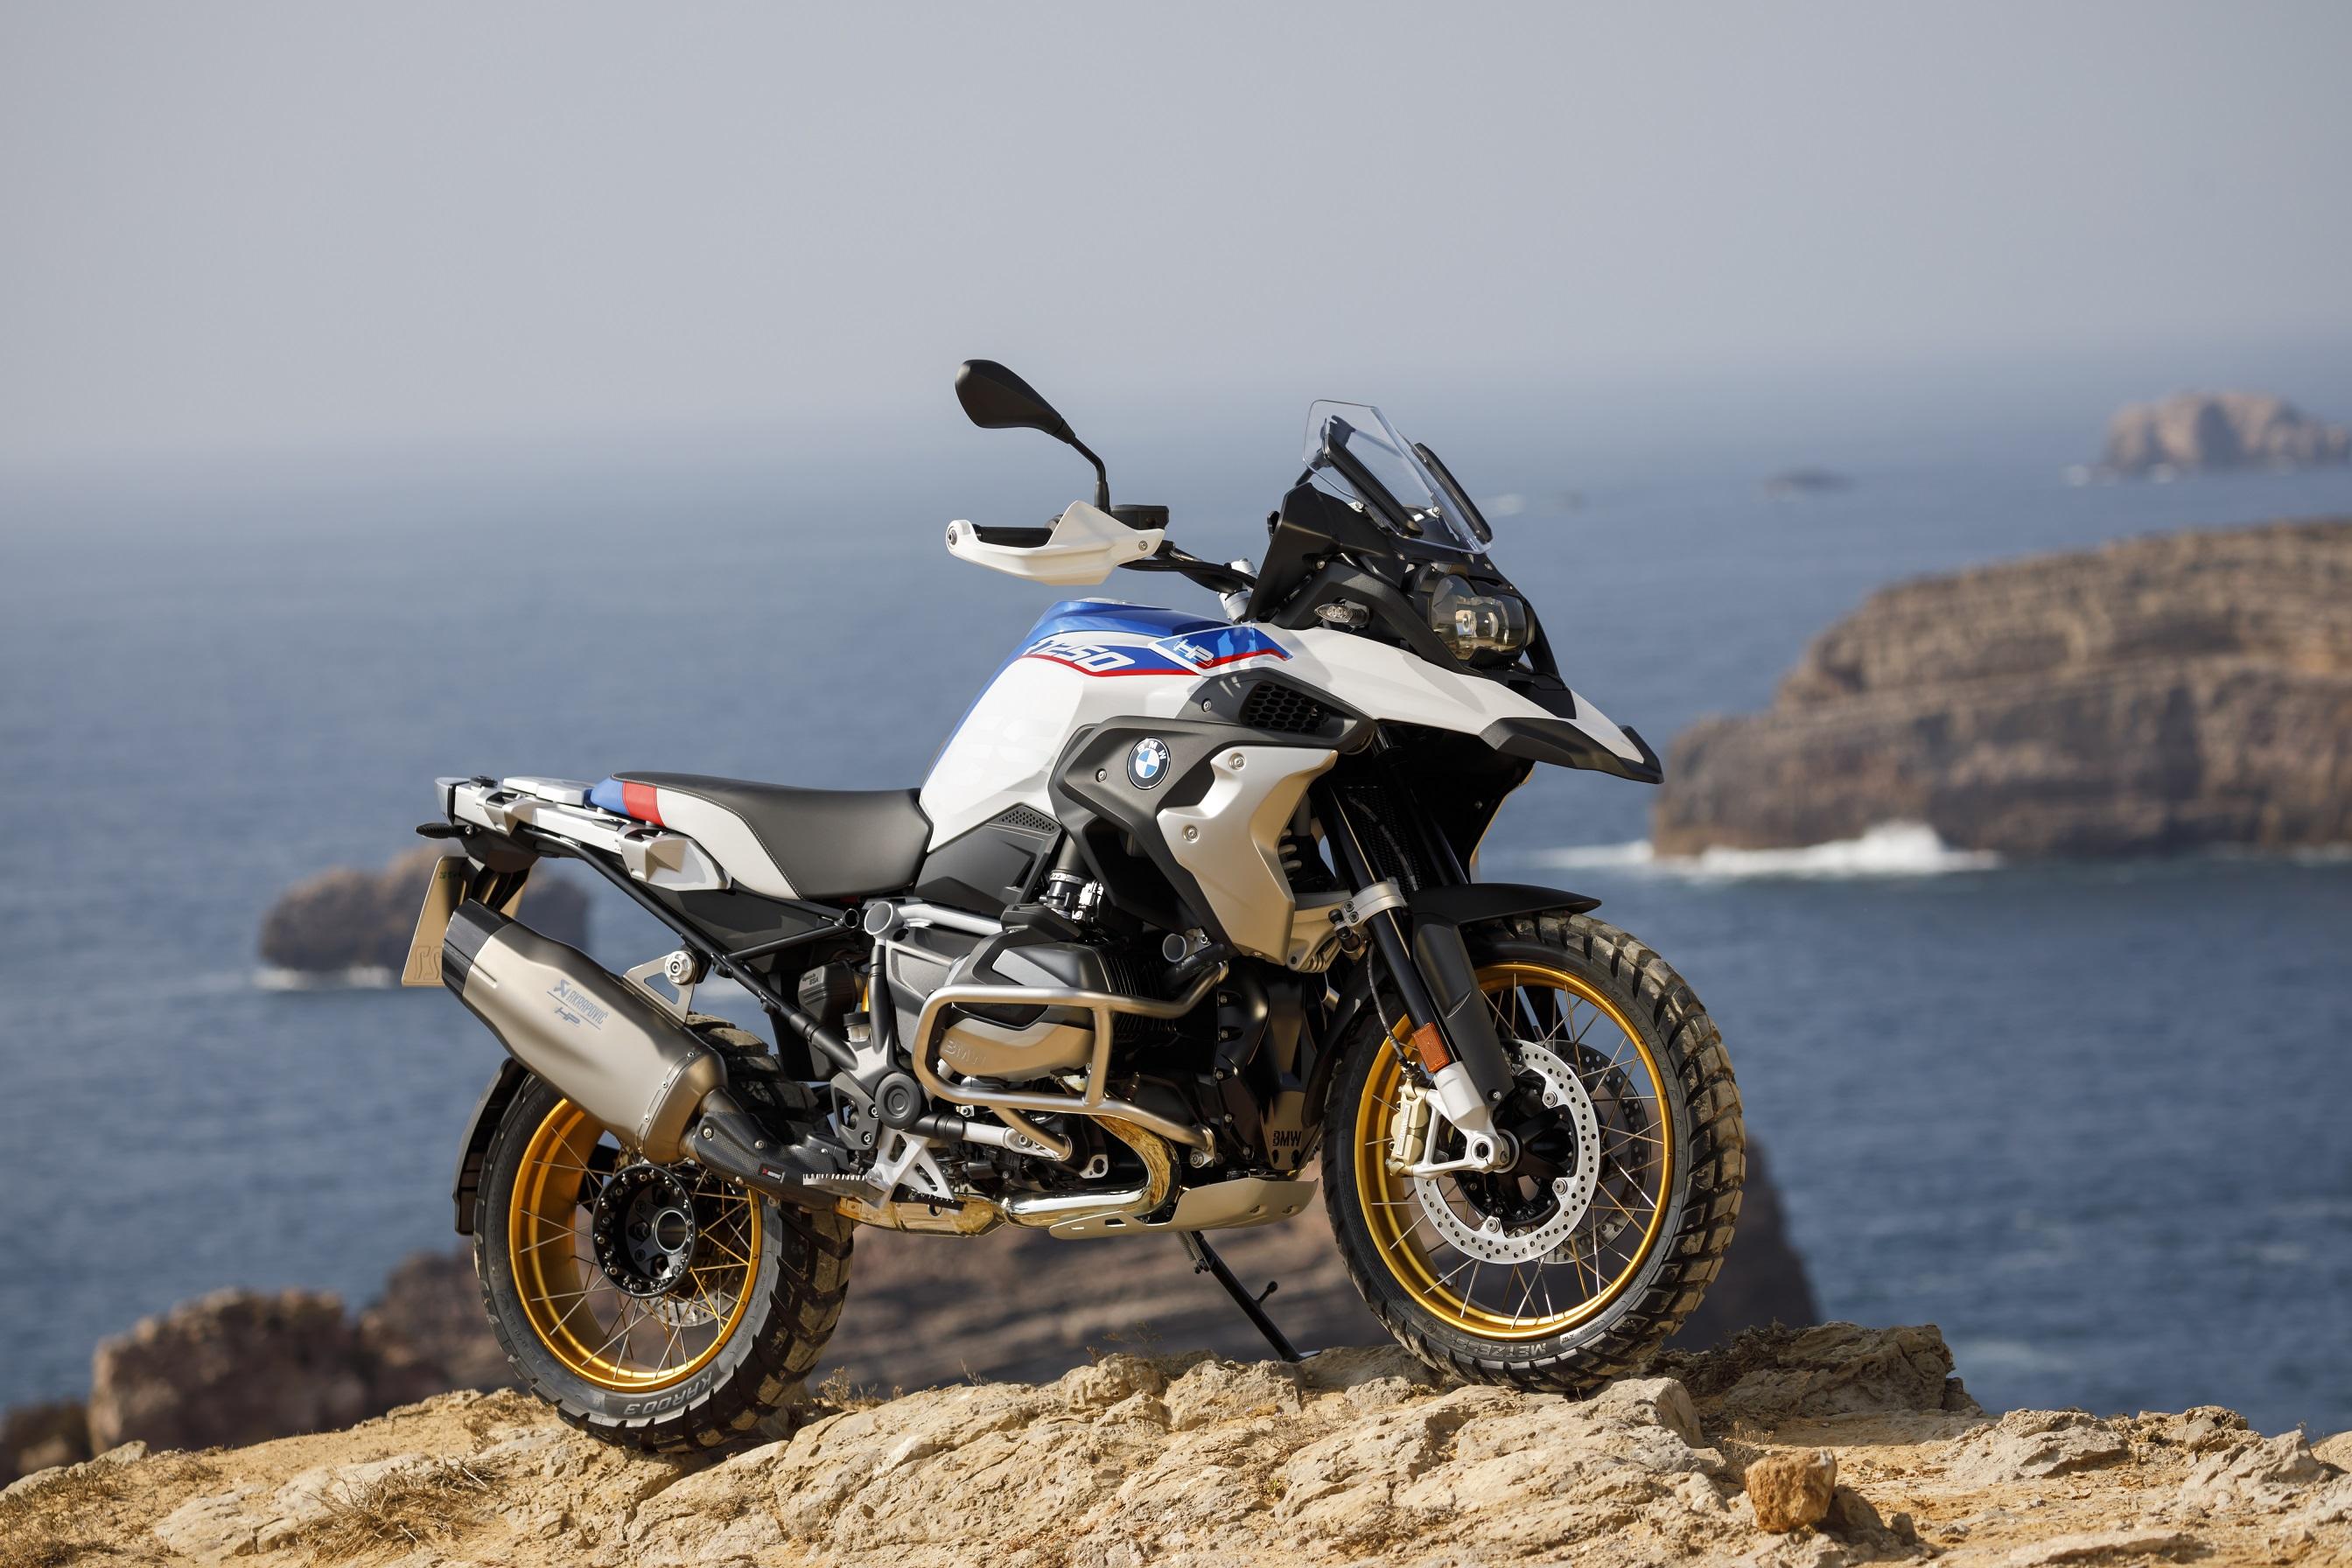 Research Motorcycles. BMW Motorcycles of San Francisco. San